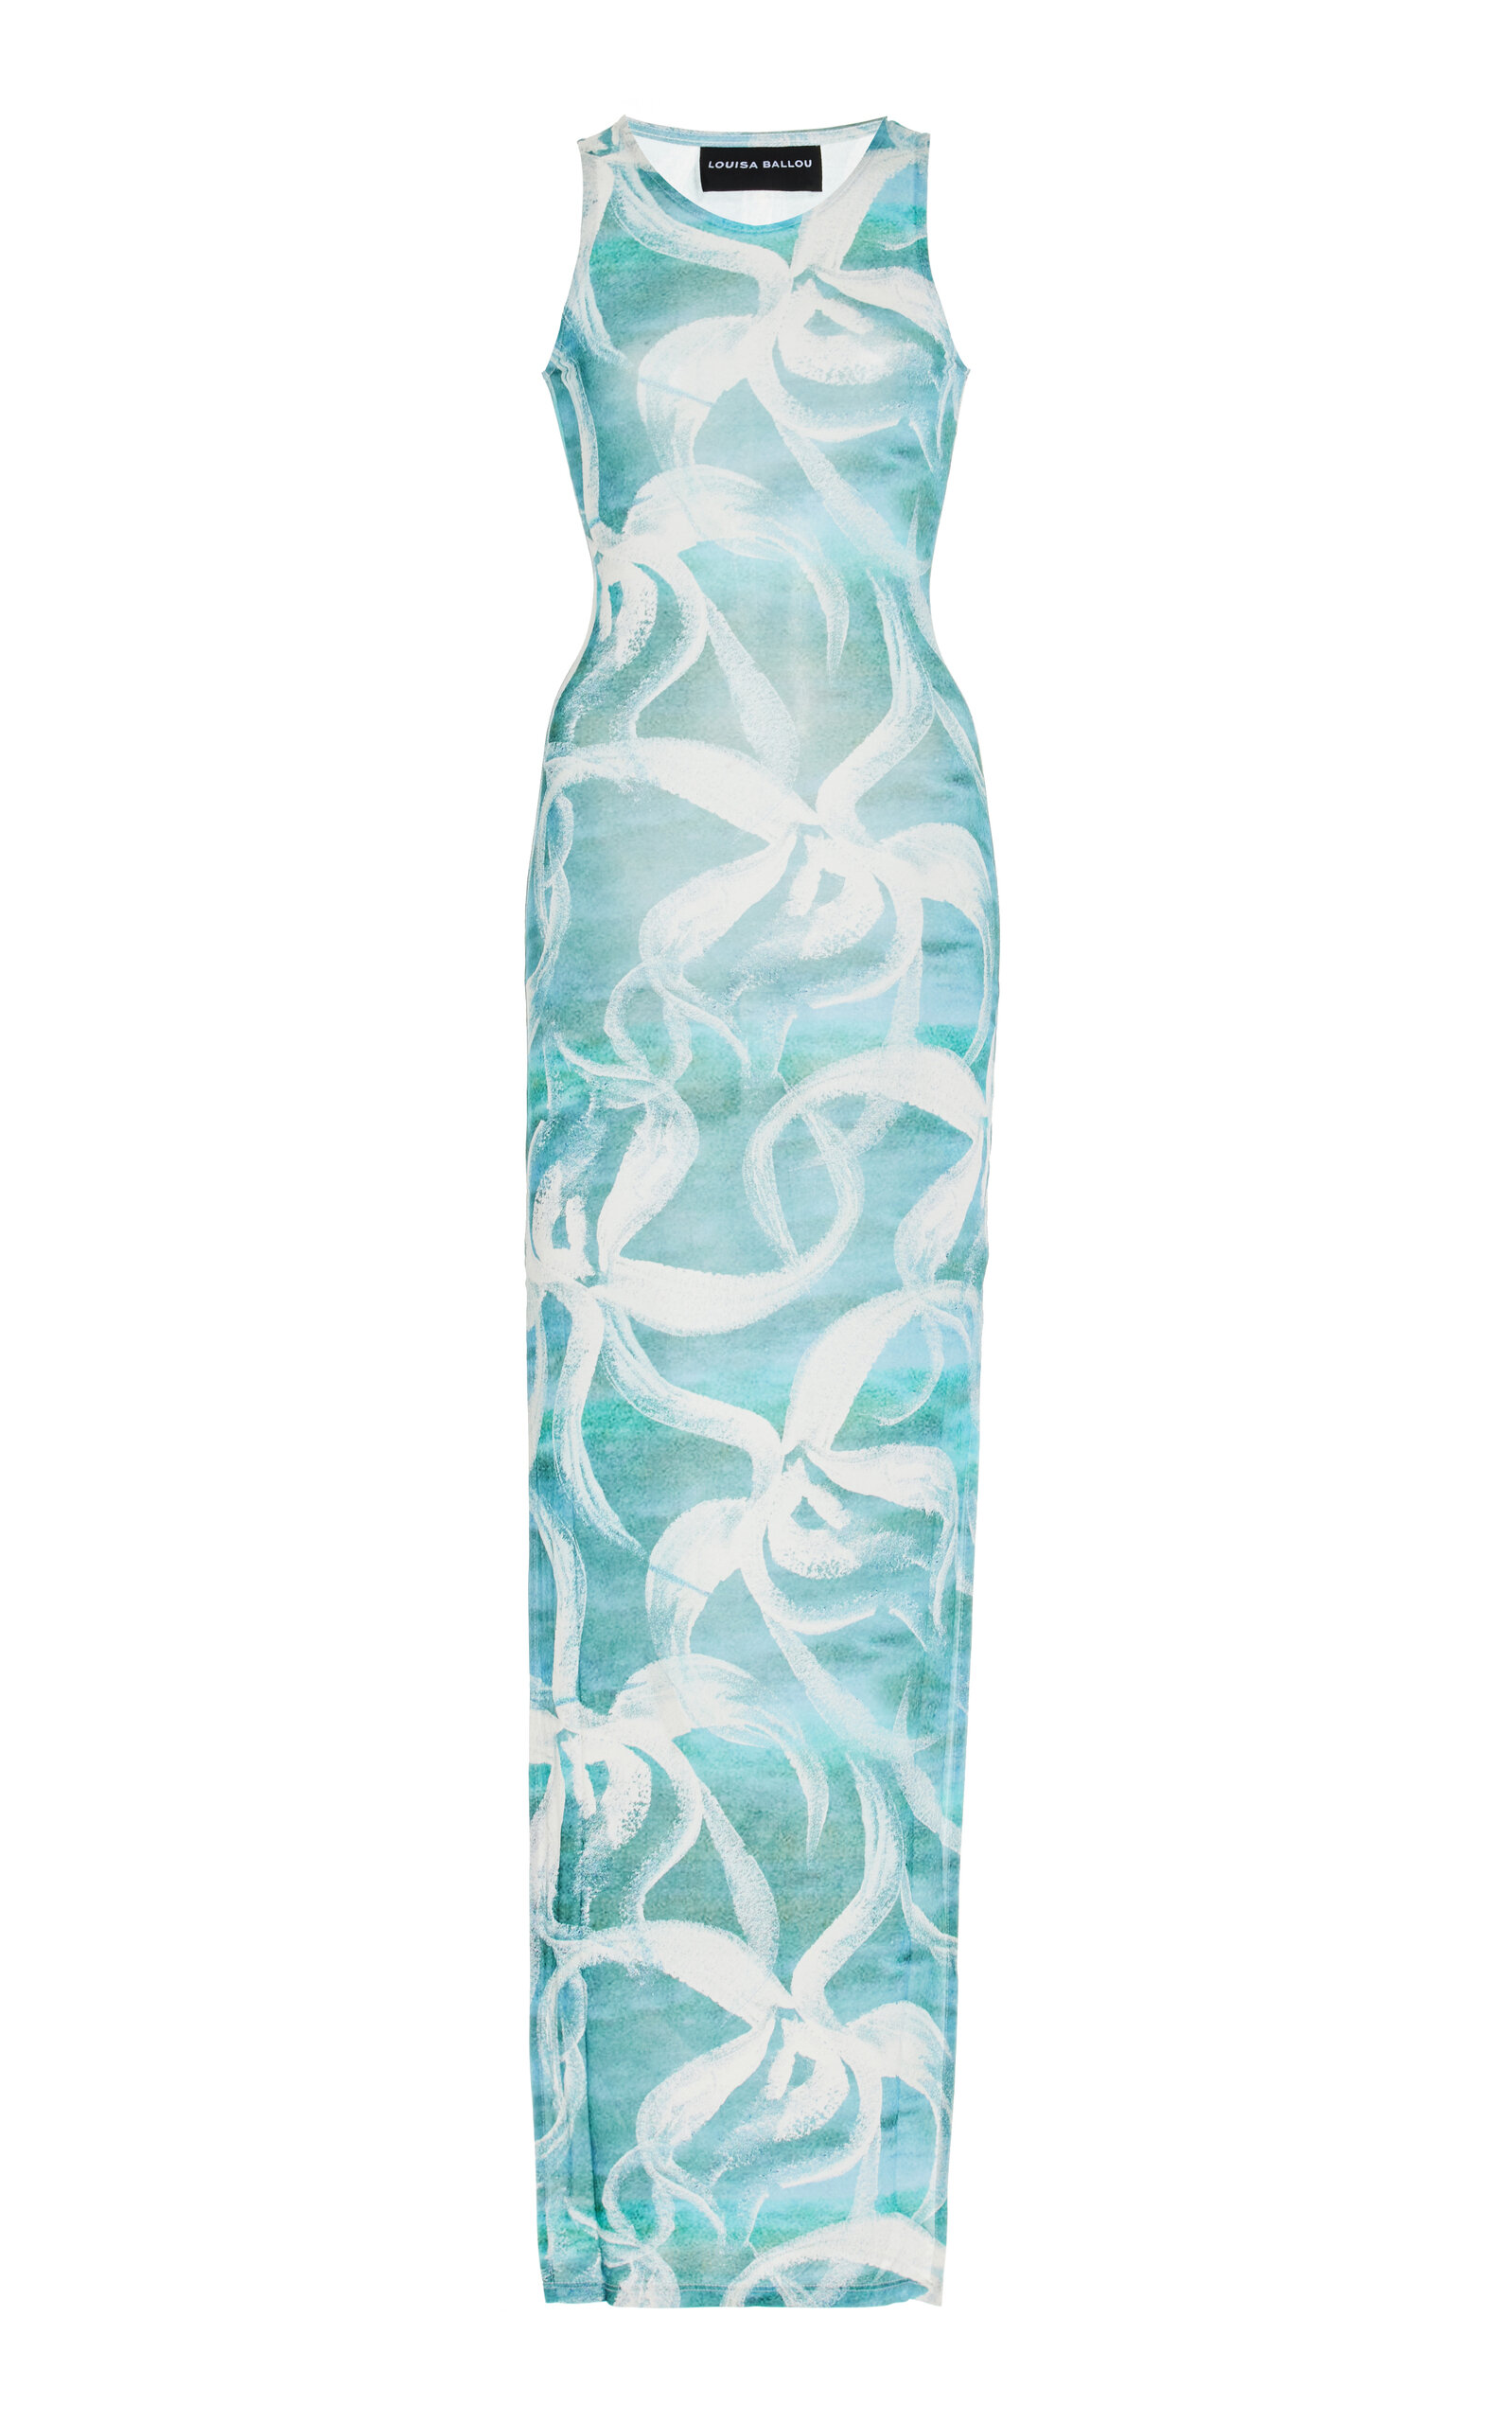 Louisa Ballou Sea Breeze Printed Mesh Maxi Dress In Blue With White Flowers